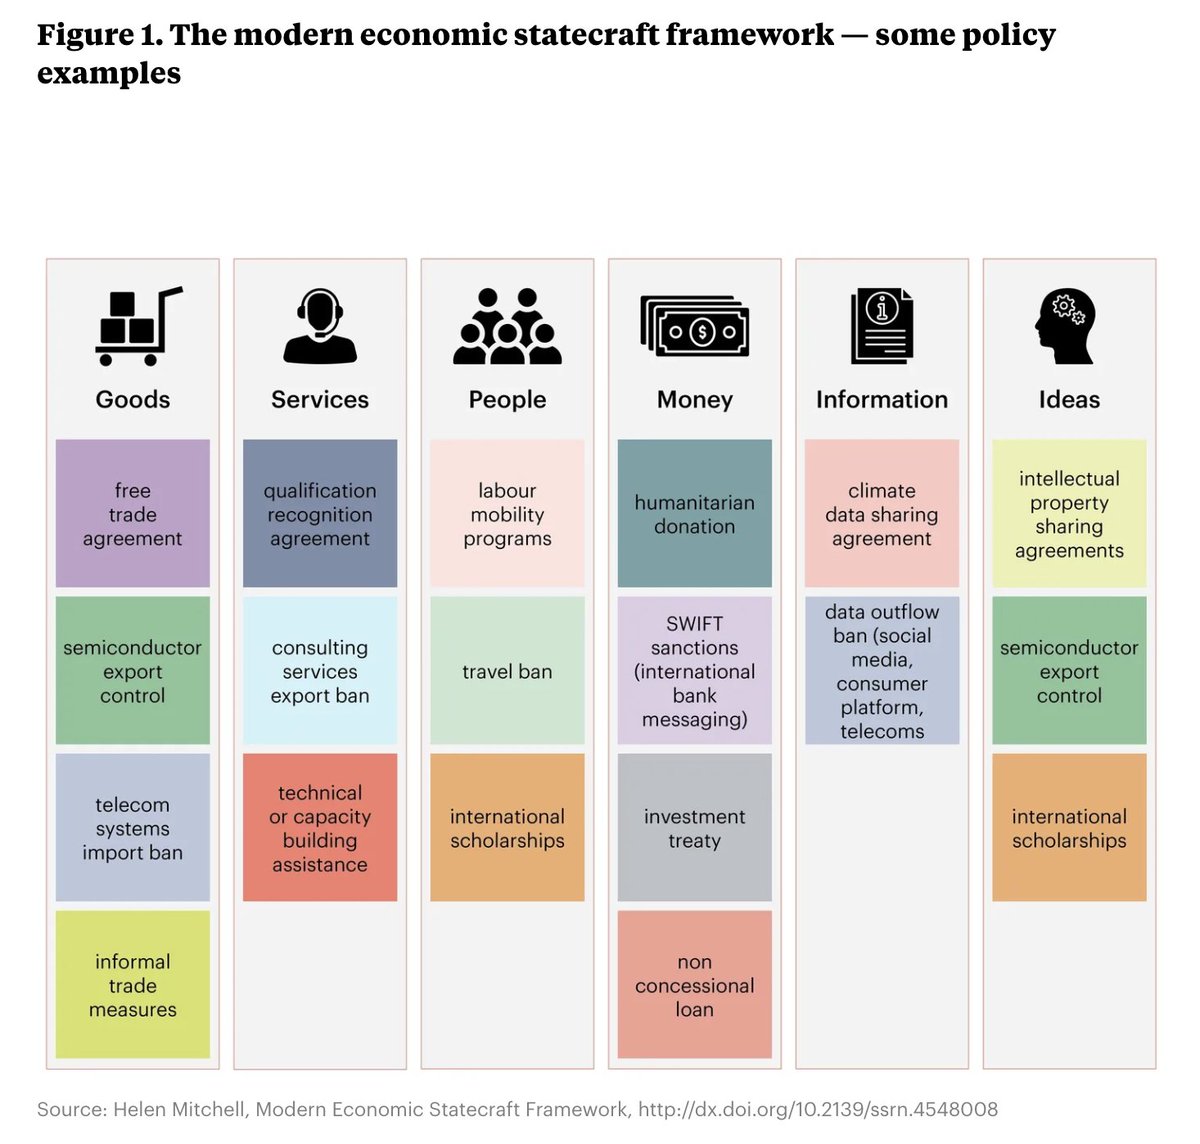 'A nation’s economic security framework...has evolved with the growing economic connections between states and the increasing complexity of supply chains and innovation ecosystems.' Read more from @helenrmitchell's Economic Security Playbook here 👇 ussc.edu.au/unlocking-econ…